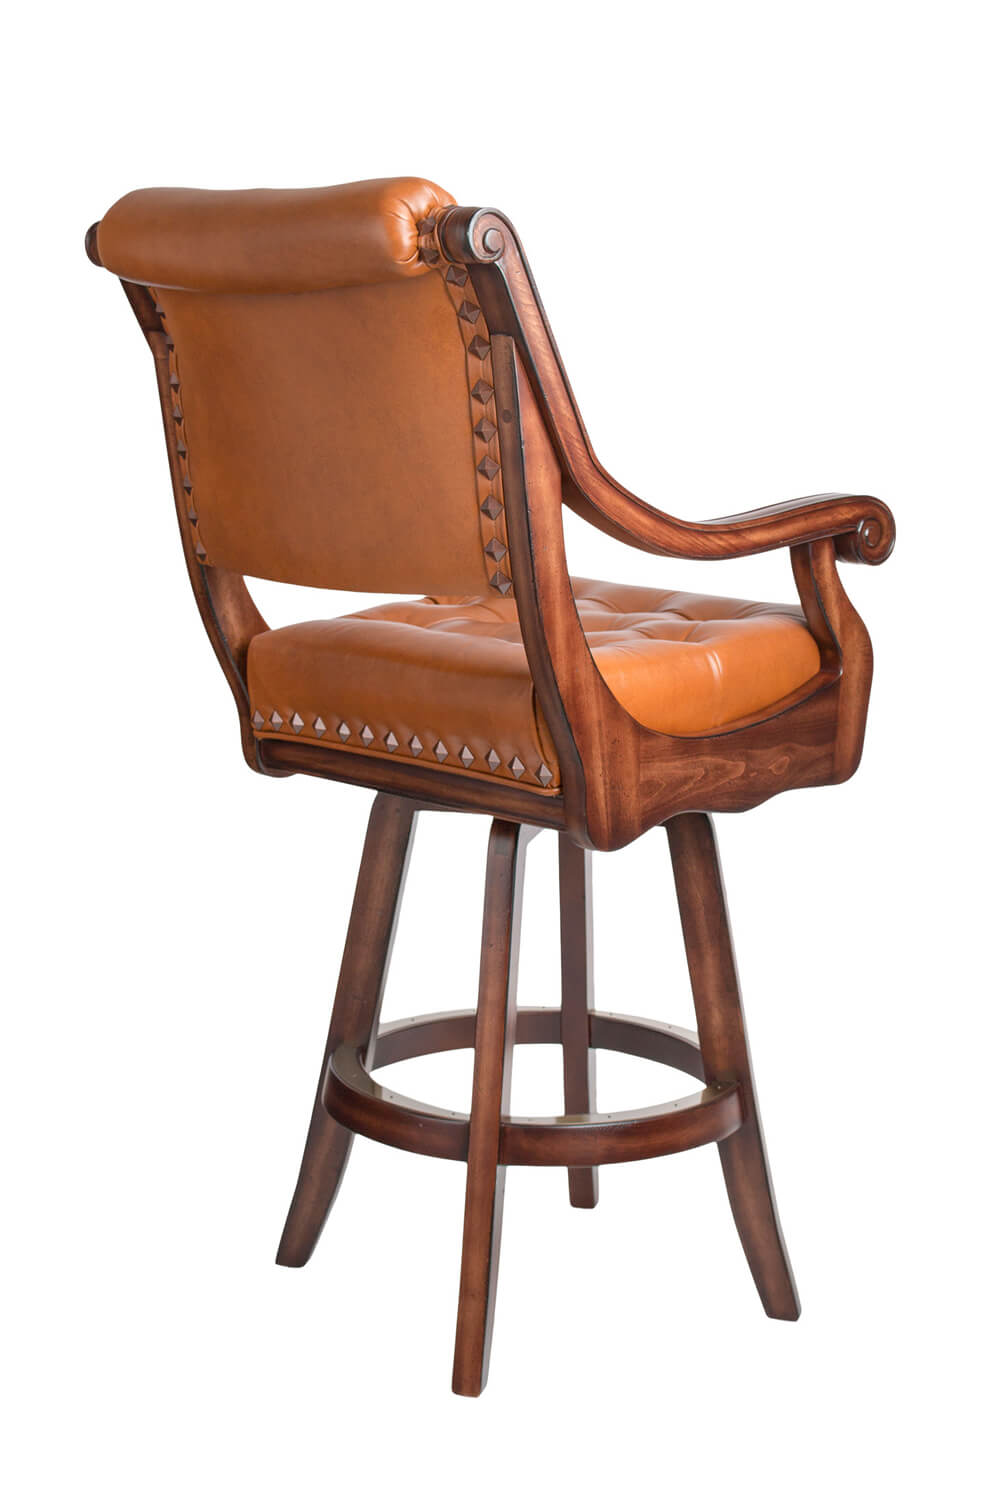 Ponce De Leon Wood Arm Swivel Stool, 24 Swivel Bar Stools With Back And Arms